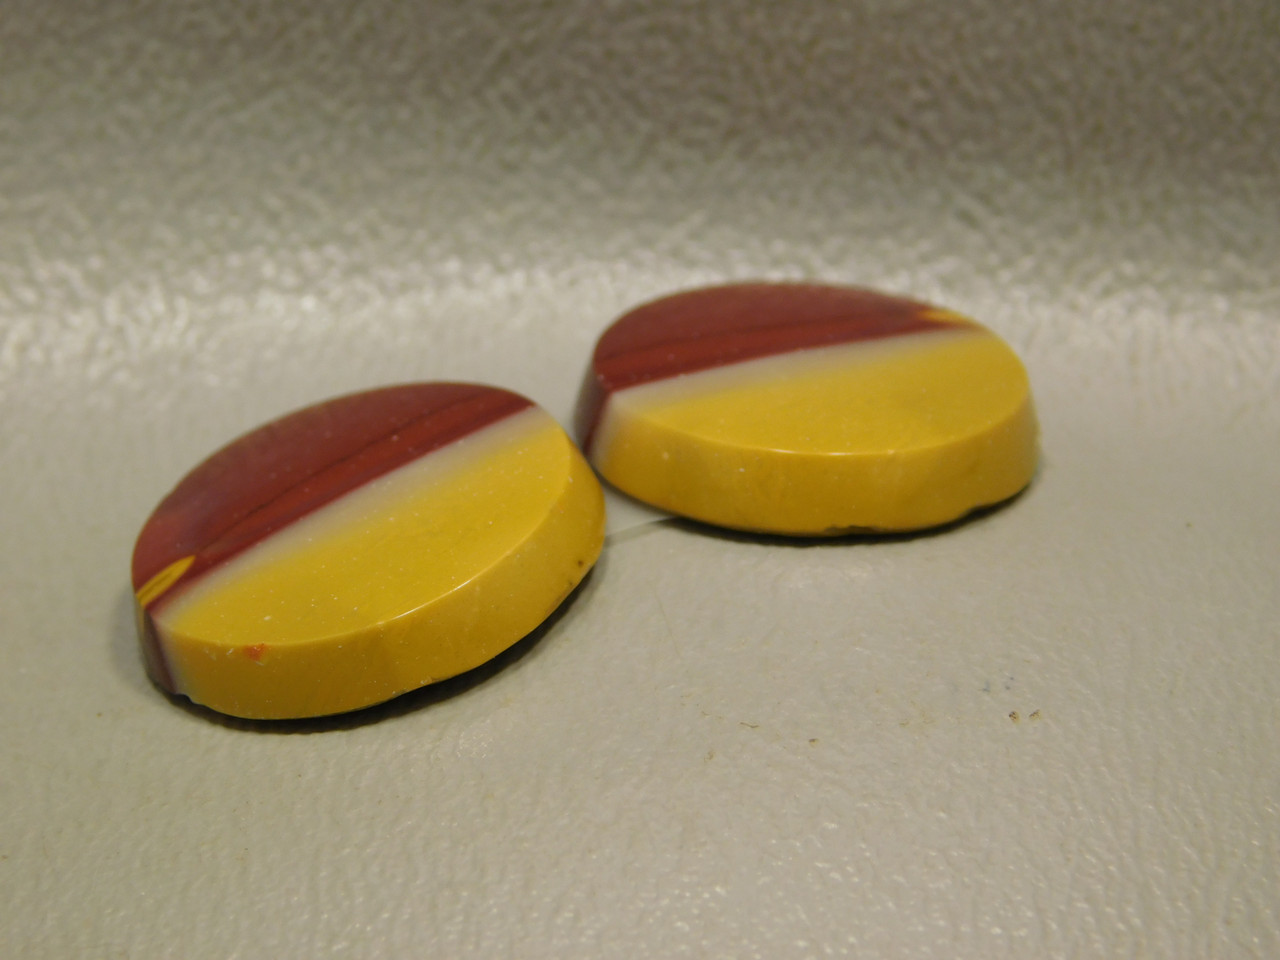 Mookaite Cabochons Mook Jasper Matched Pairs 18 mm Rounds #6